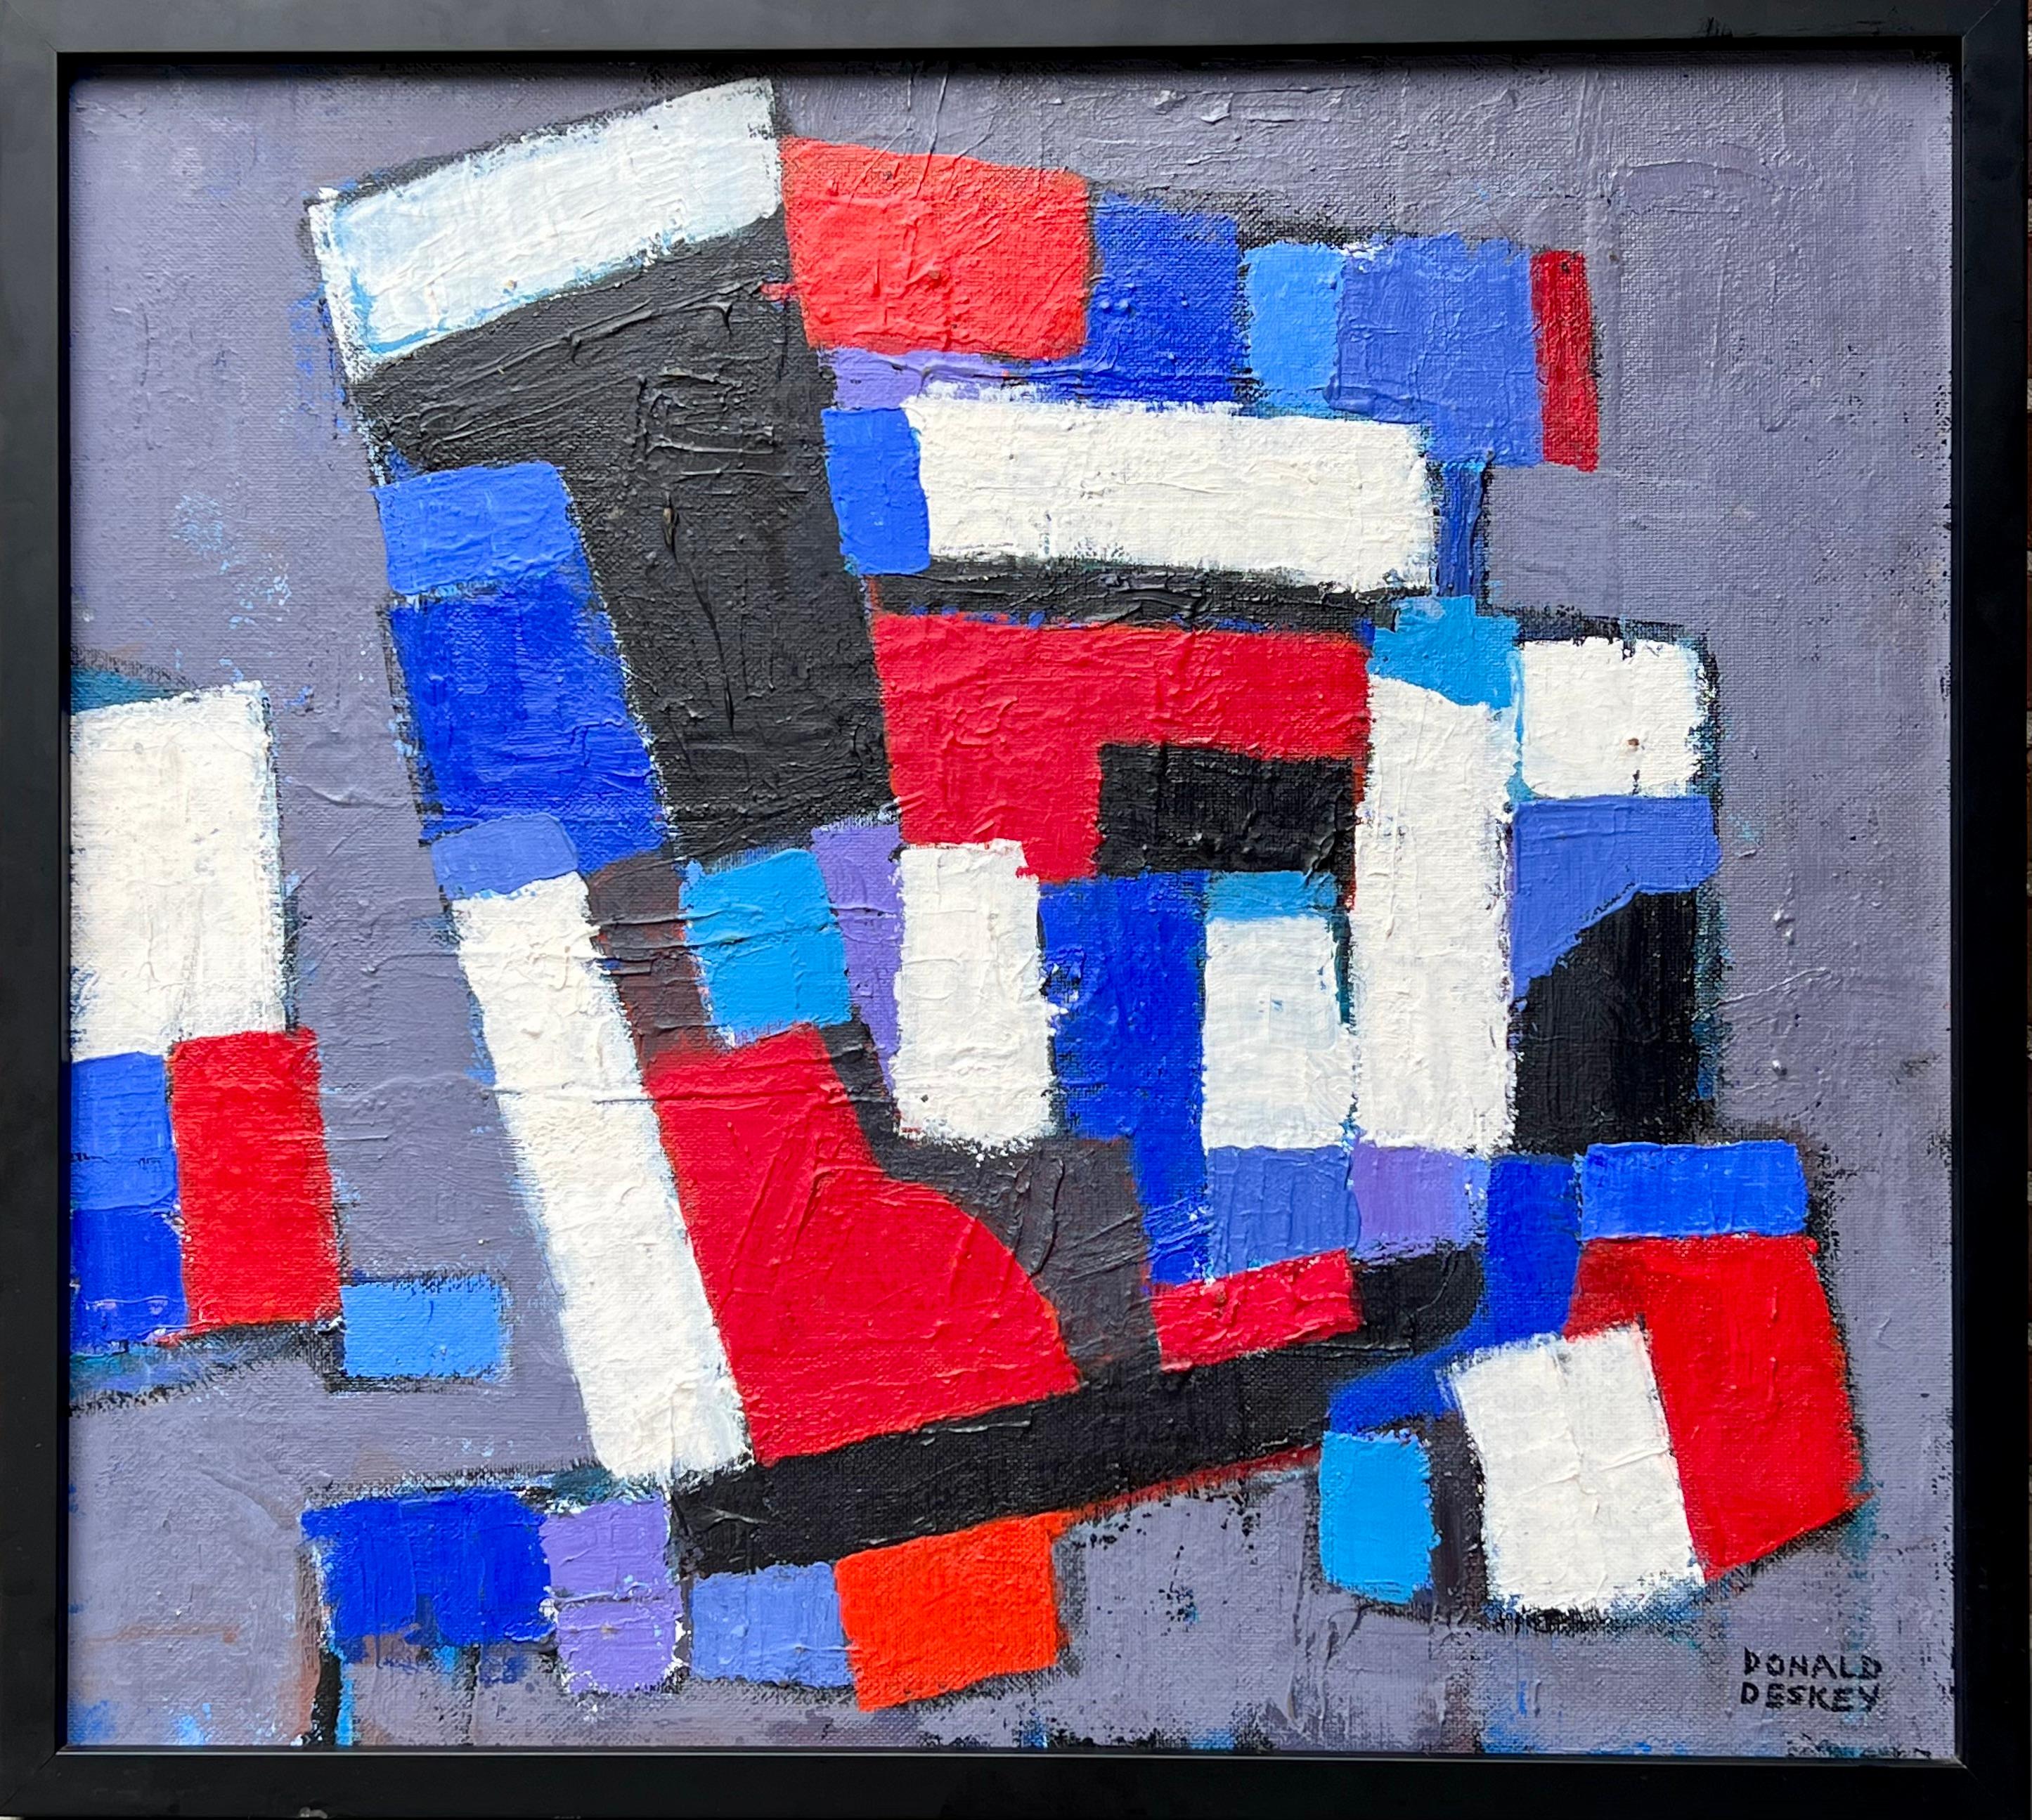 Abstract Mid-20th Century Oil Non Objective NYC Radio City Music Hall - Painting by Donald Deskey